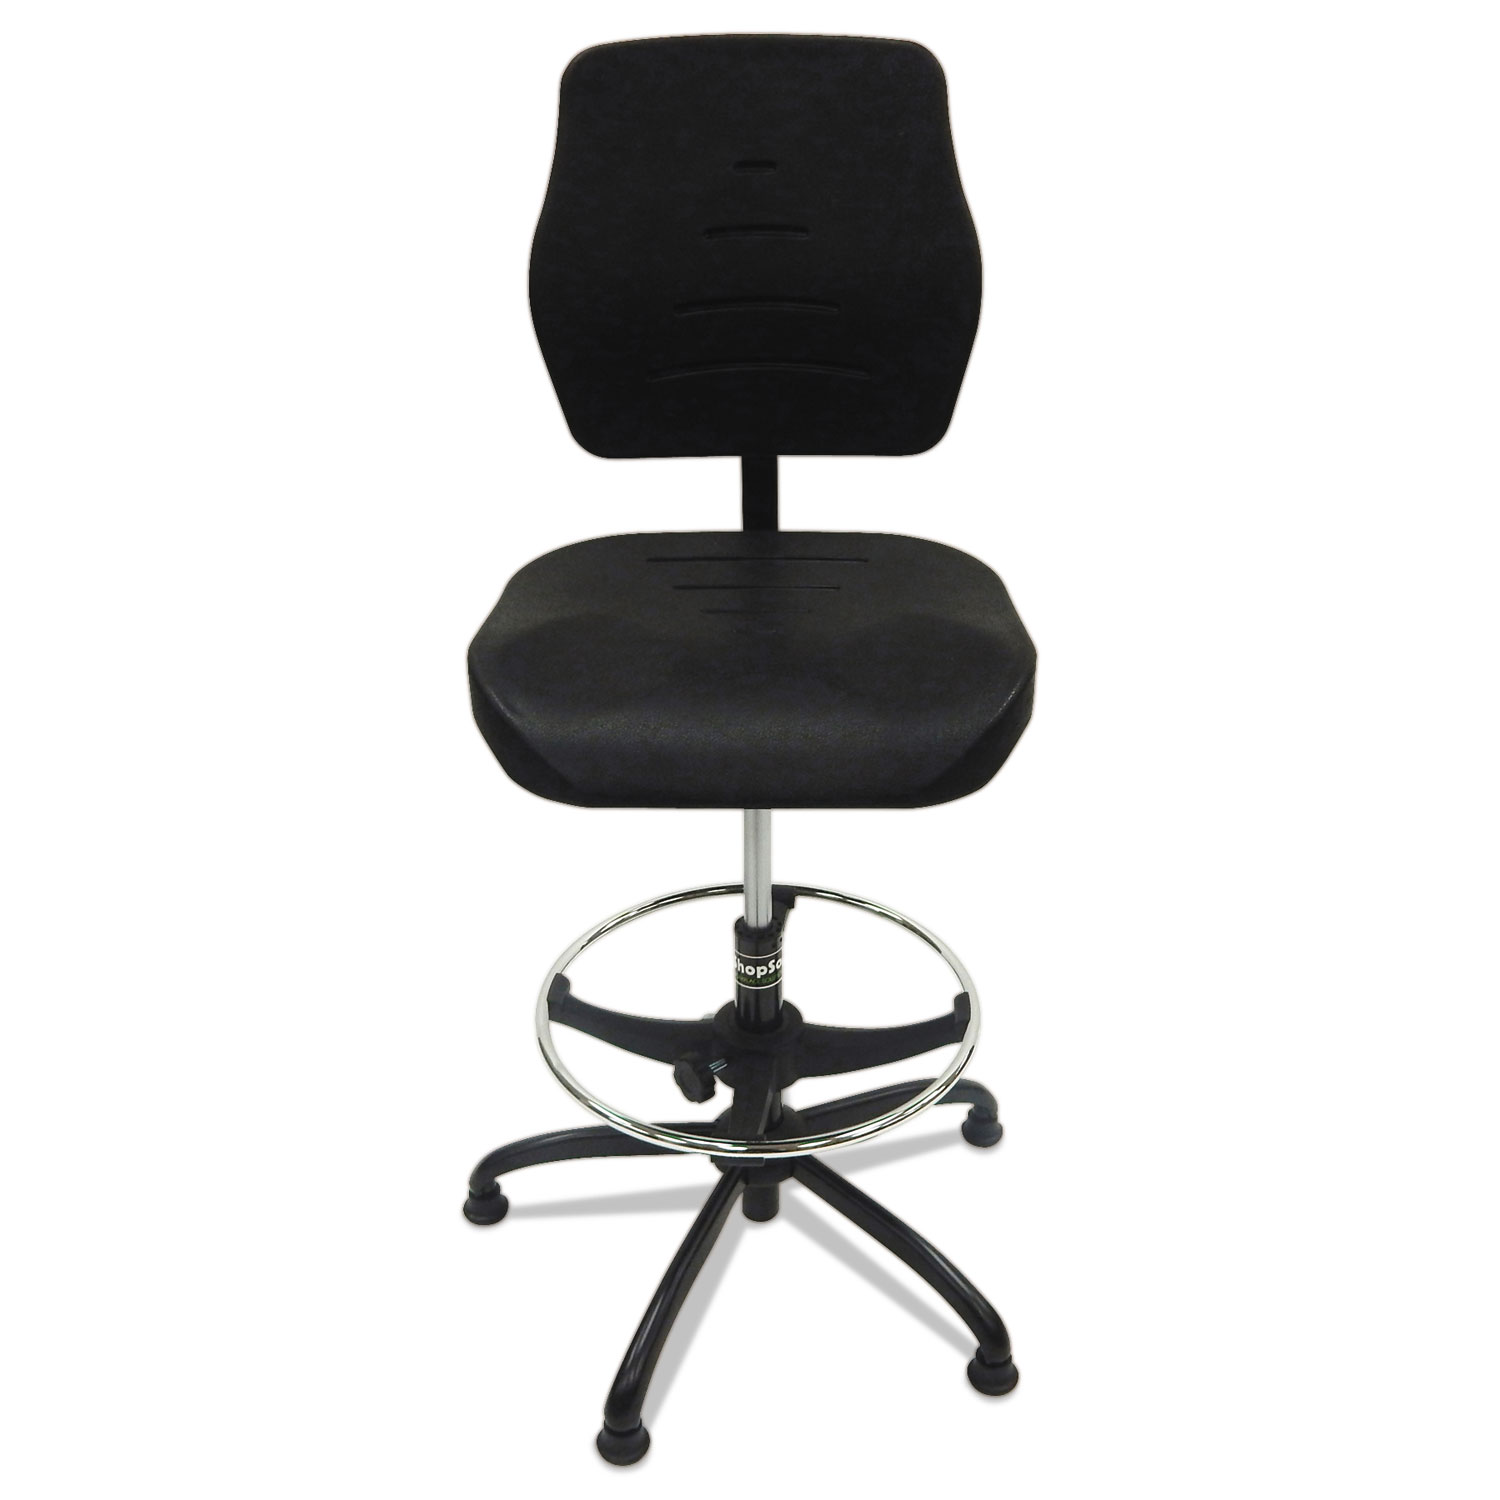  ShopSol 3010014 Production Chair, 32 Seat Height, Supports up to 300 lbs., Black Seat/Black Back, Black Base (SSX3010014) 